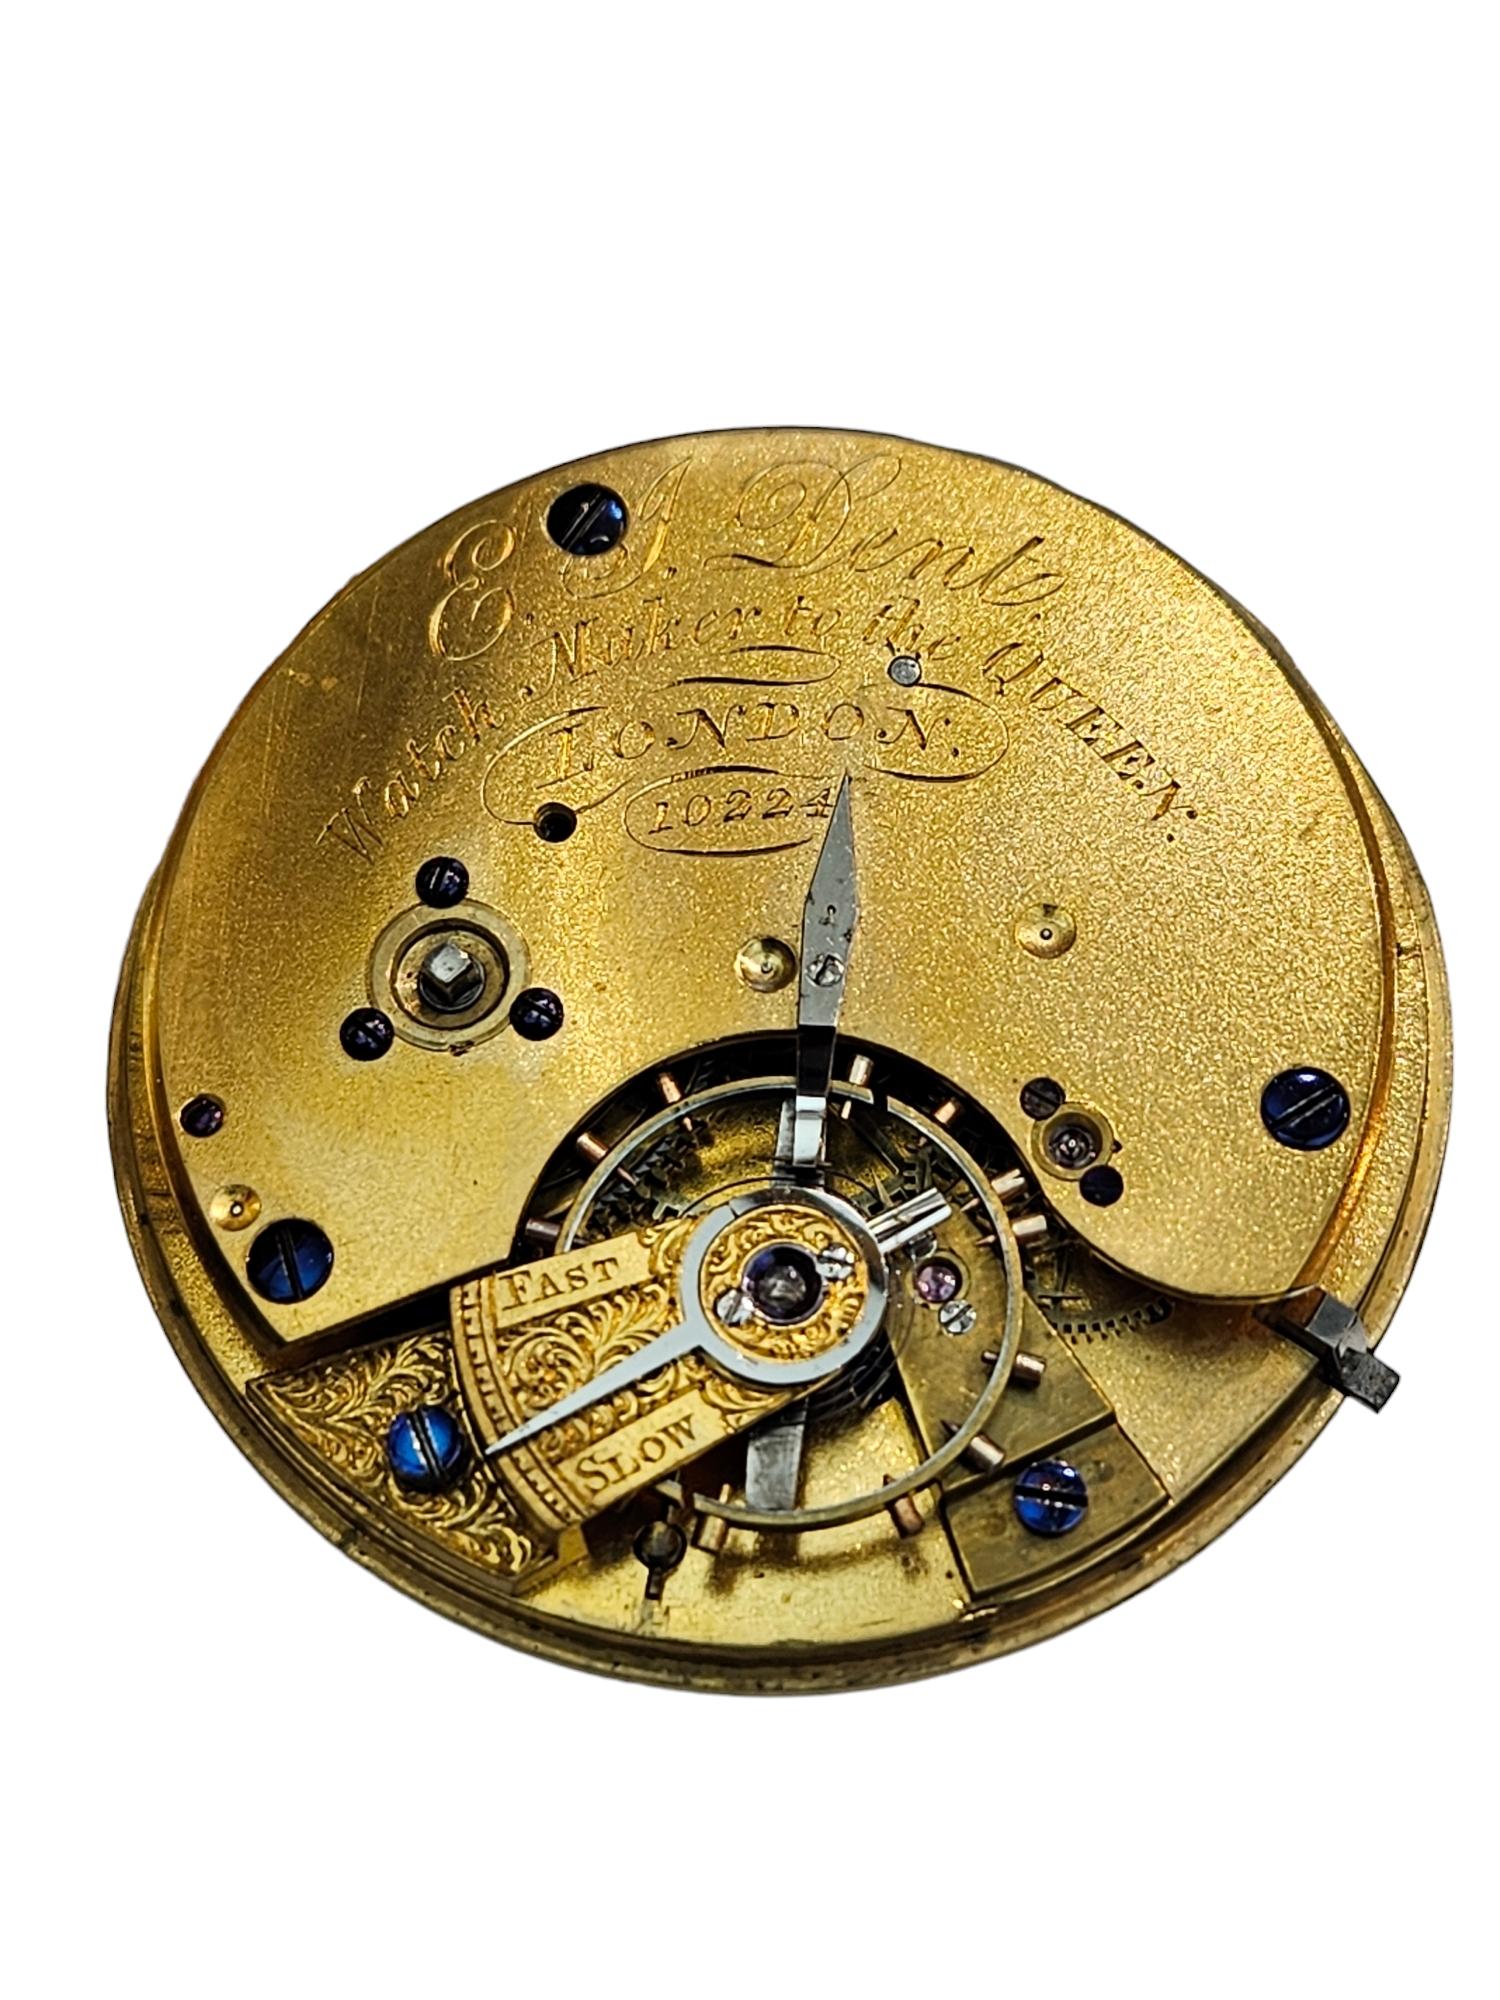 18 Kt Gold E.J Dent London, Yellow Gold, Open Face Verge Pocket watch   For Sale 10